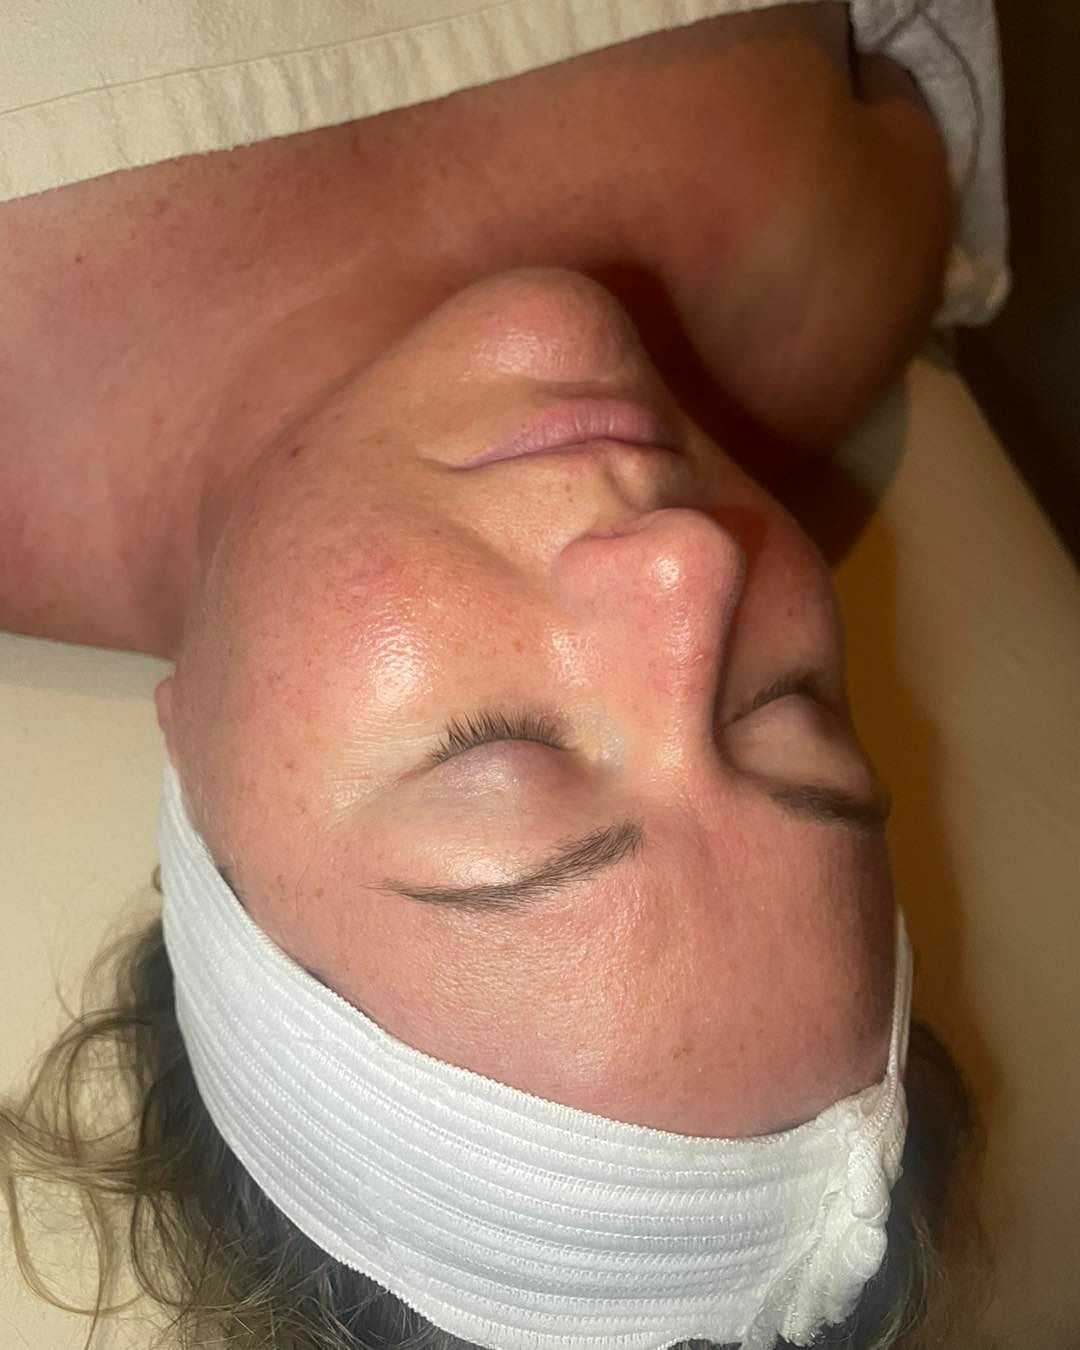 Person lying on a spa bed with a headband, eyes closed, receiving a facial treatment.